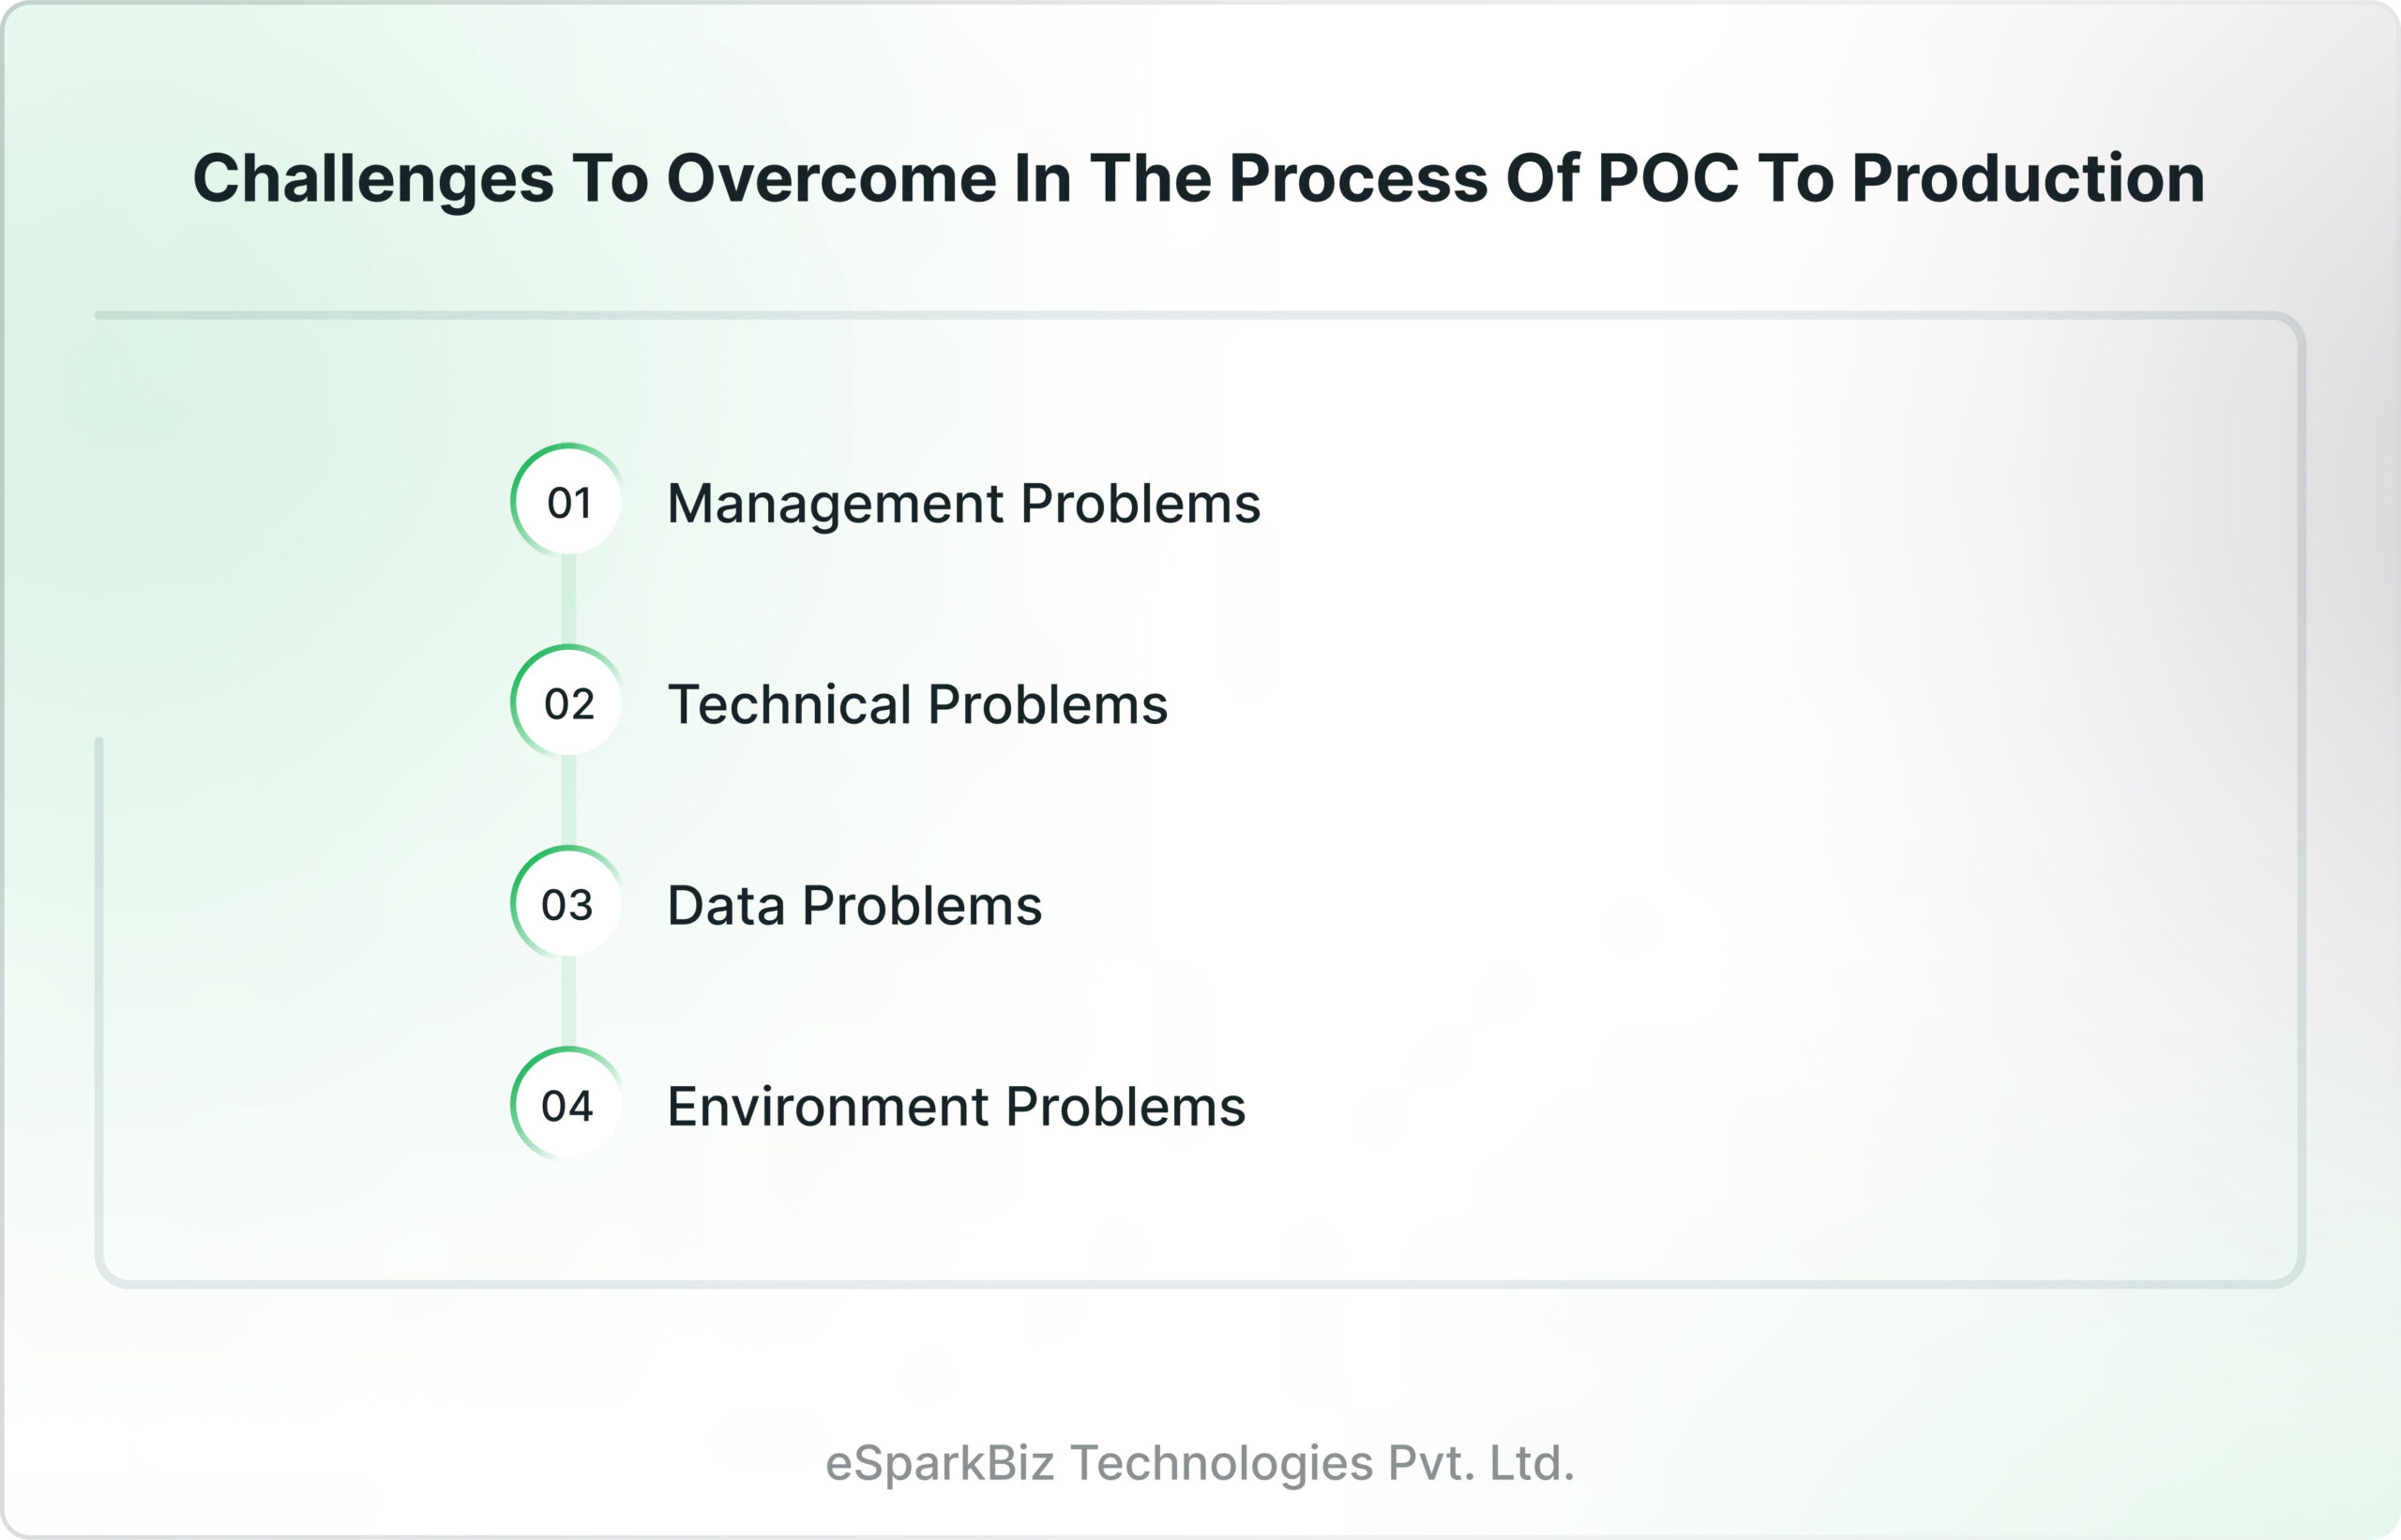 Challenges to Overcome in the Process of POC to Production